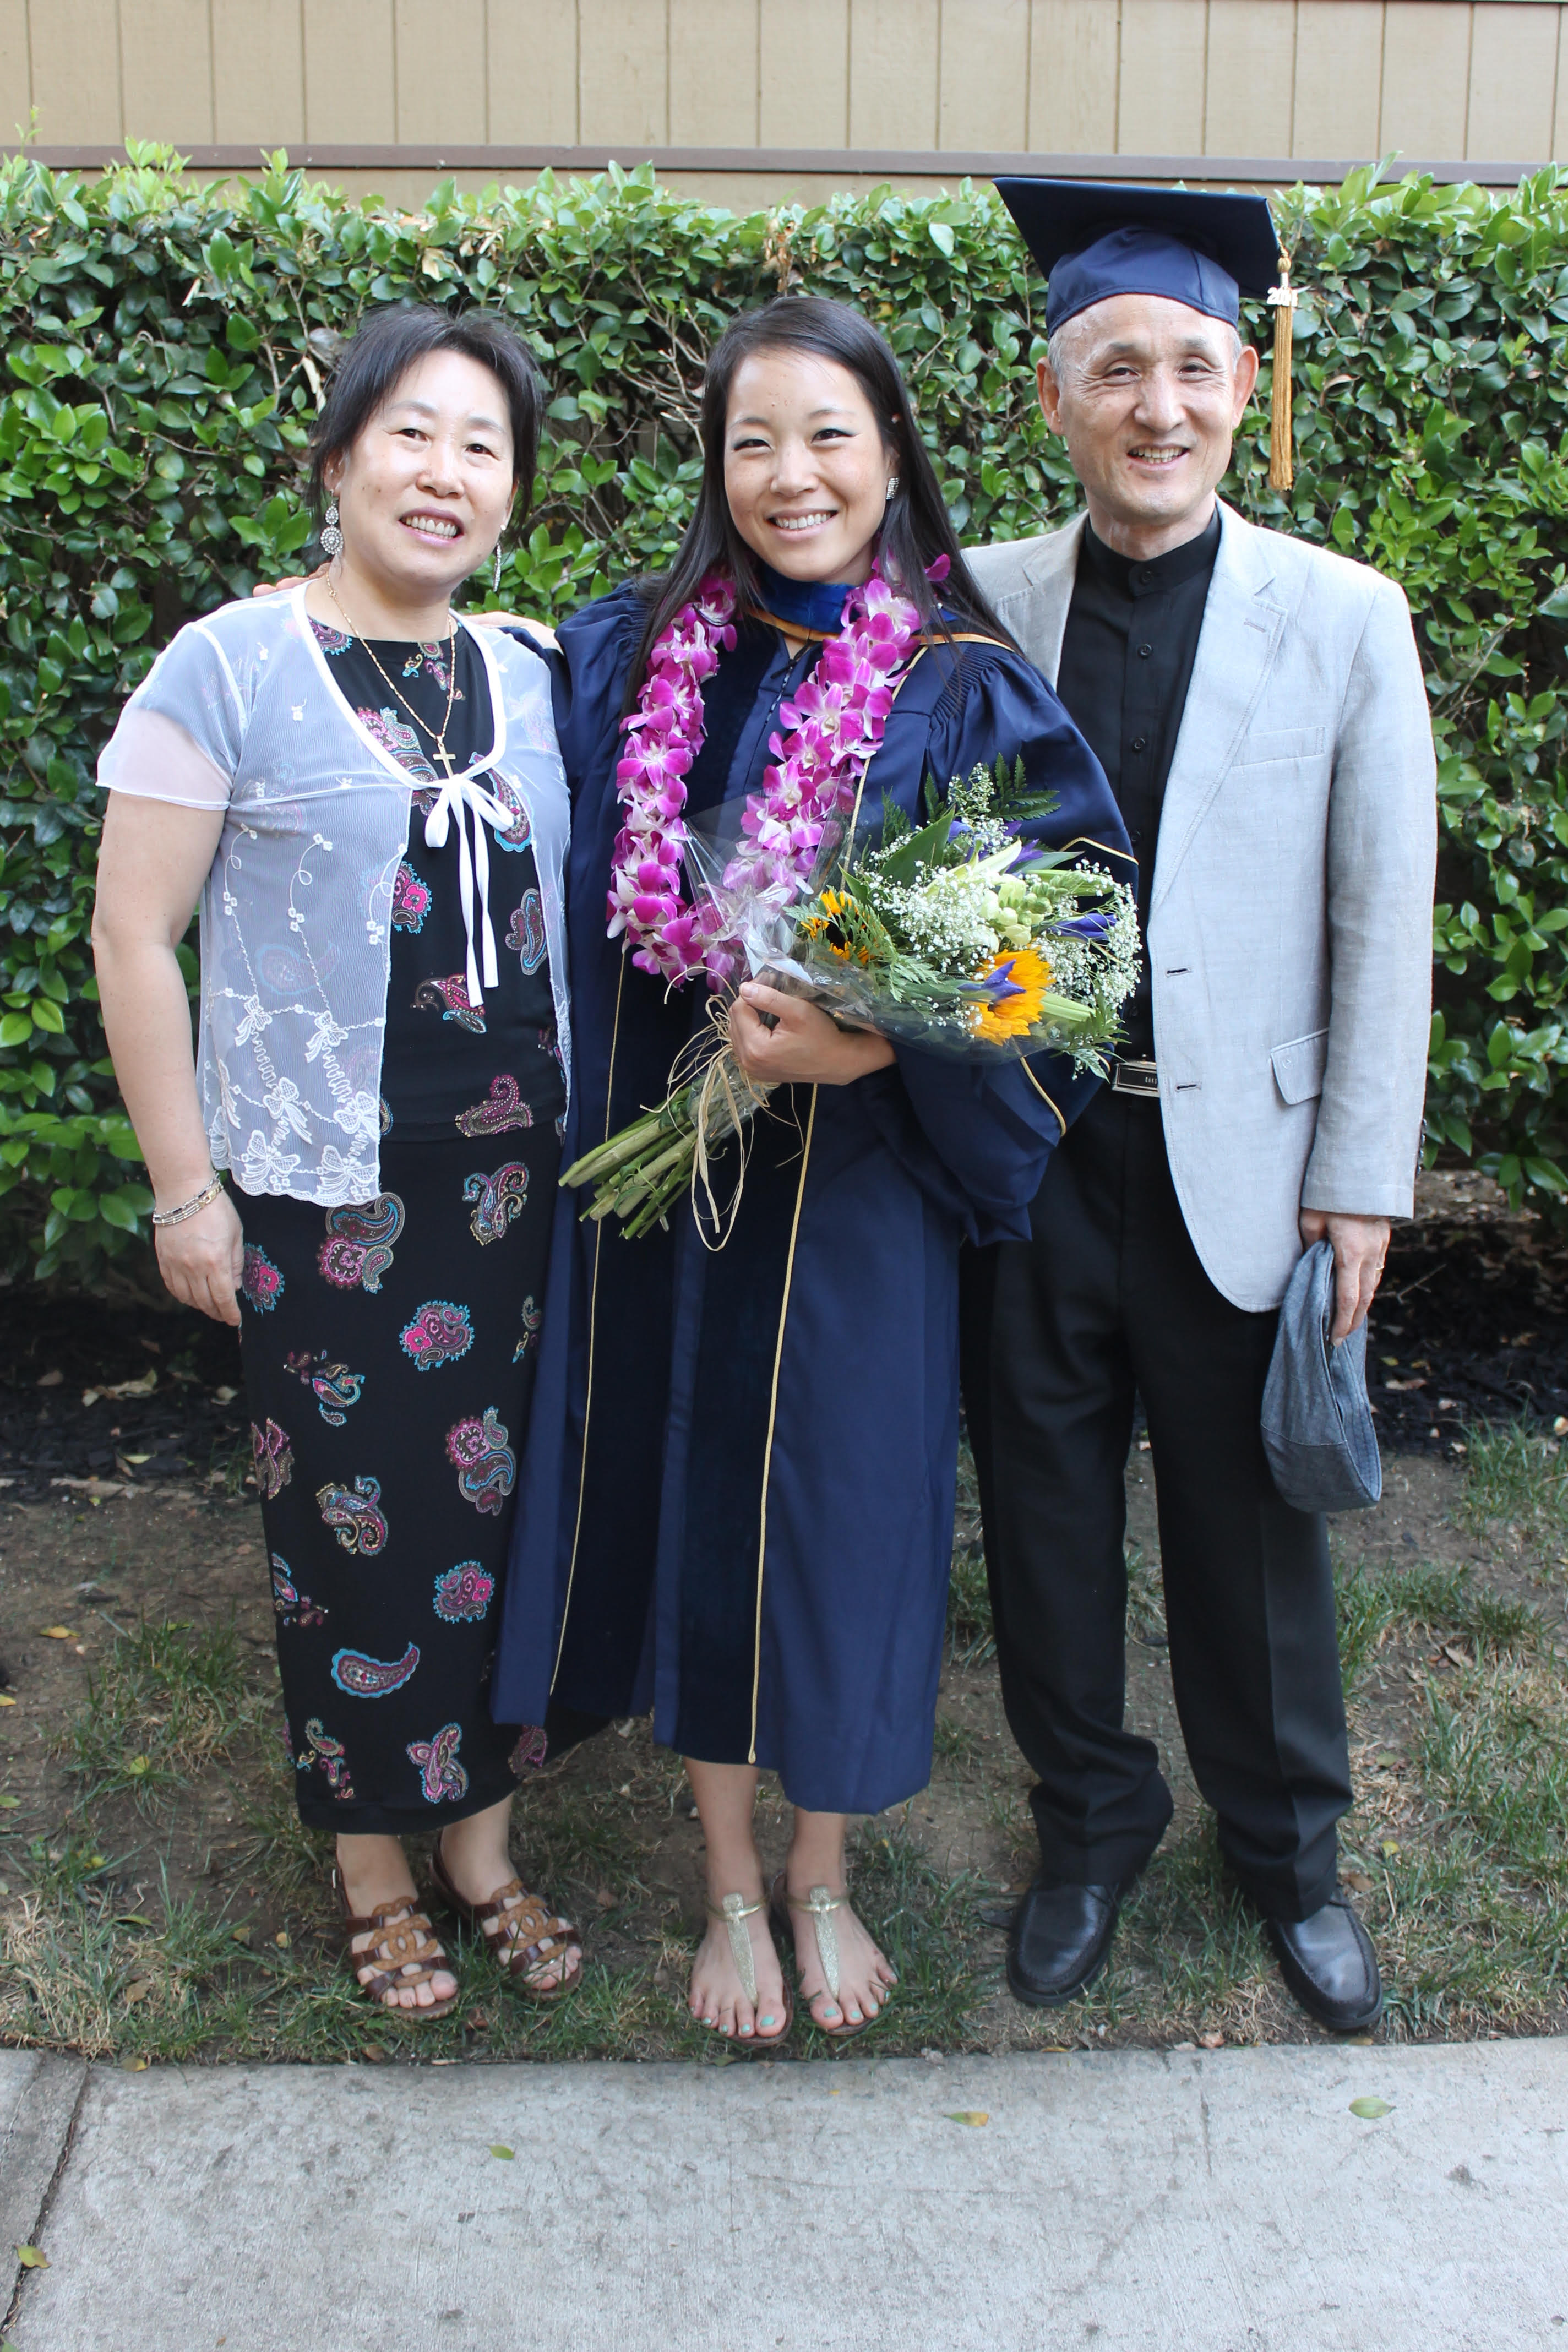 Dr. Kim-Mozeleski with her parents at her doctoral graduation. Her childhood curiosity created the environment that allows her to flourish as a researcher.